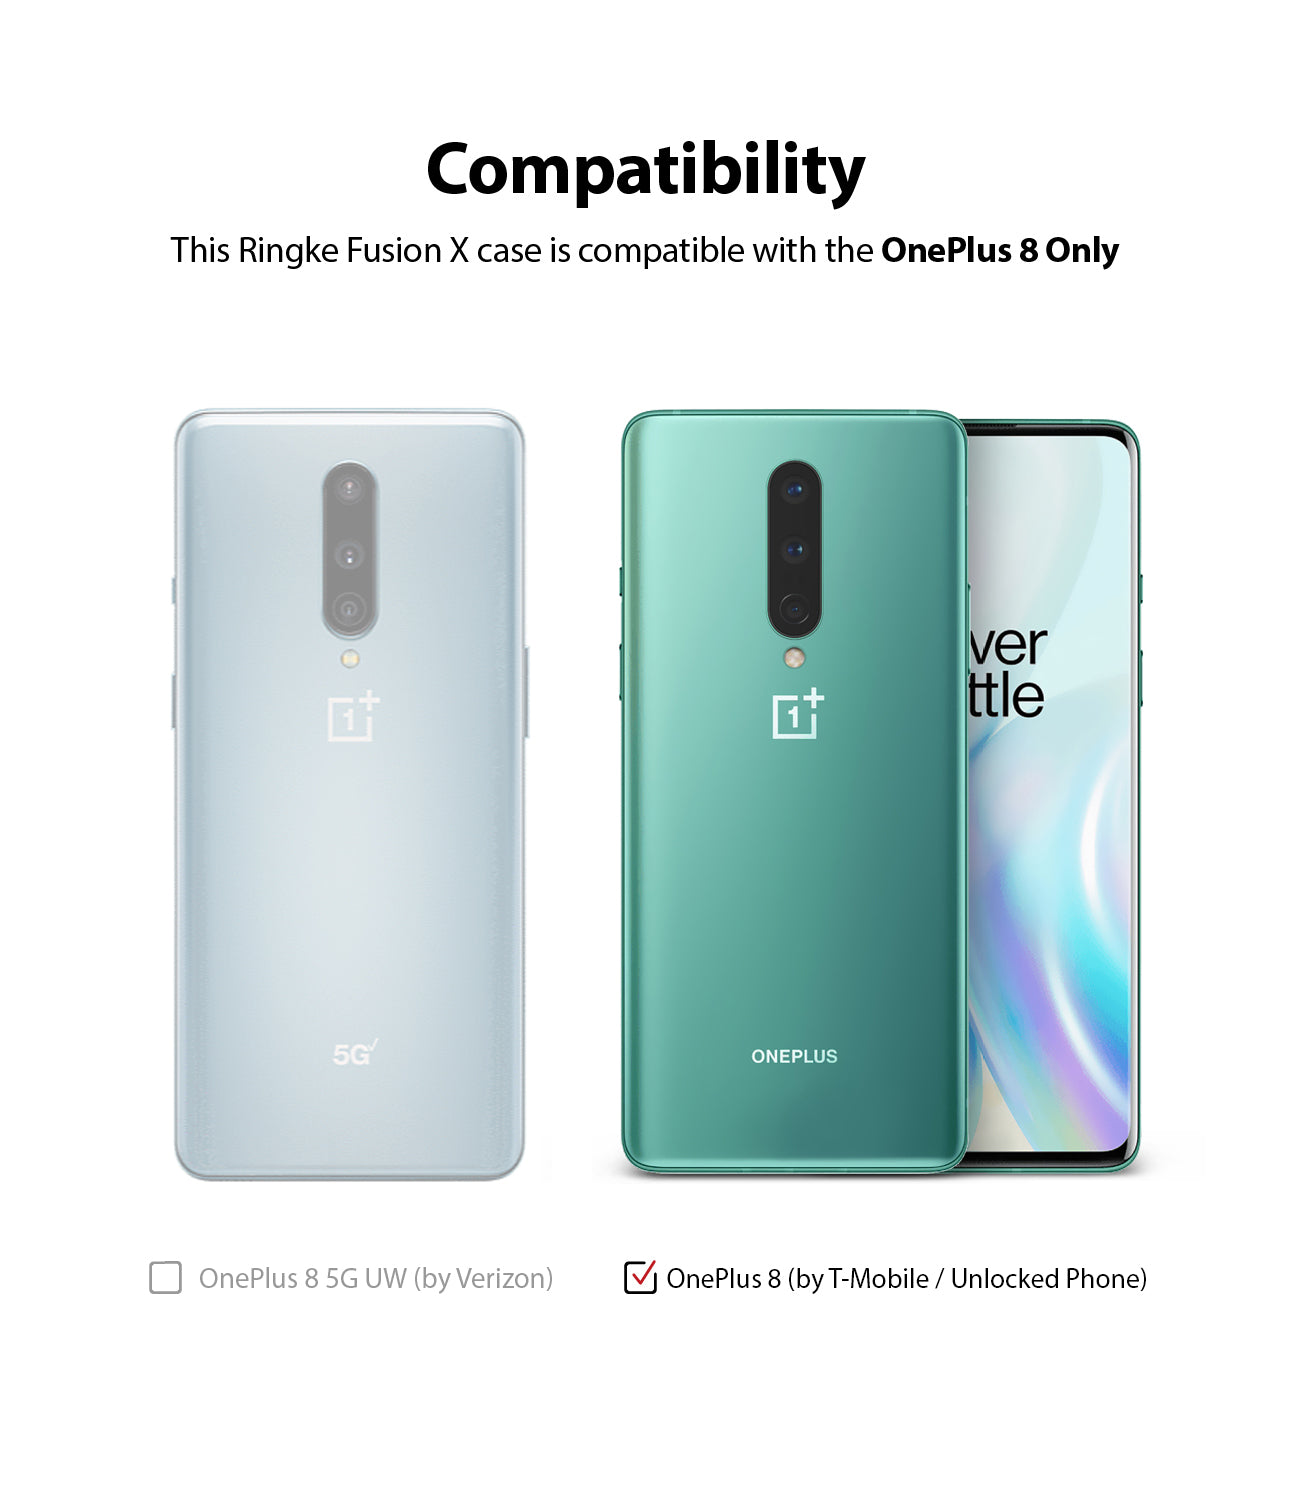 compatible with oneplus 8 